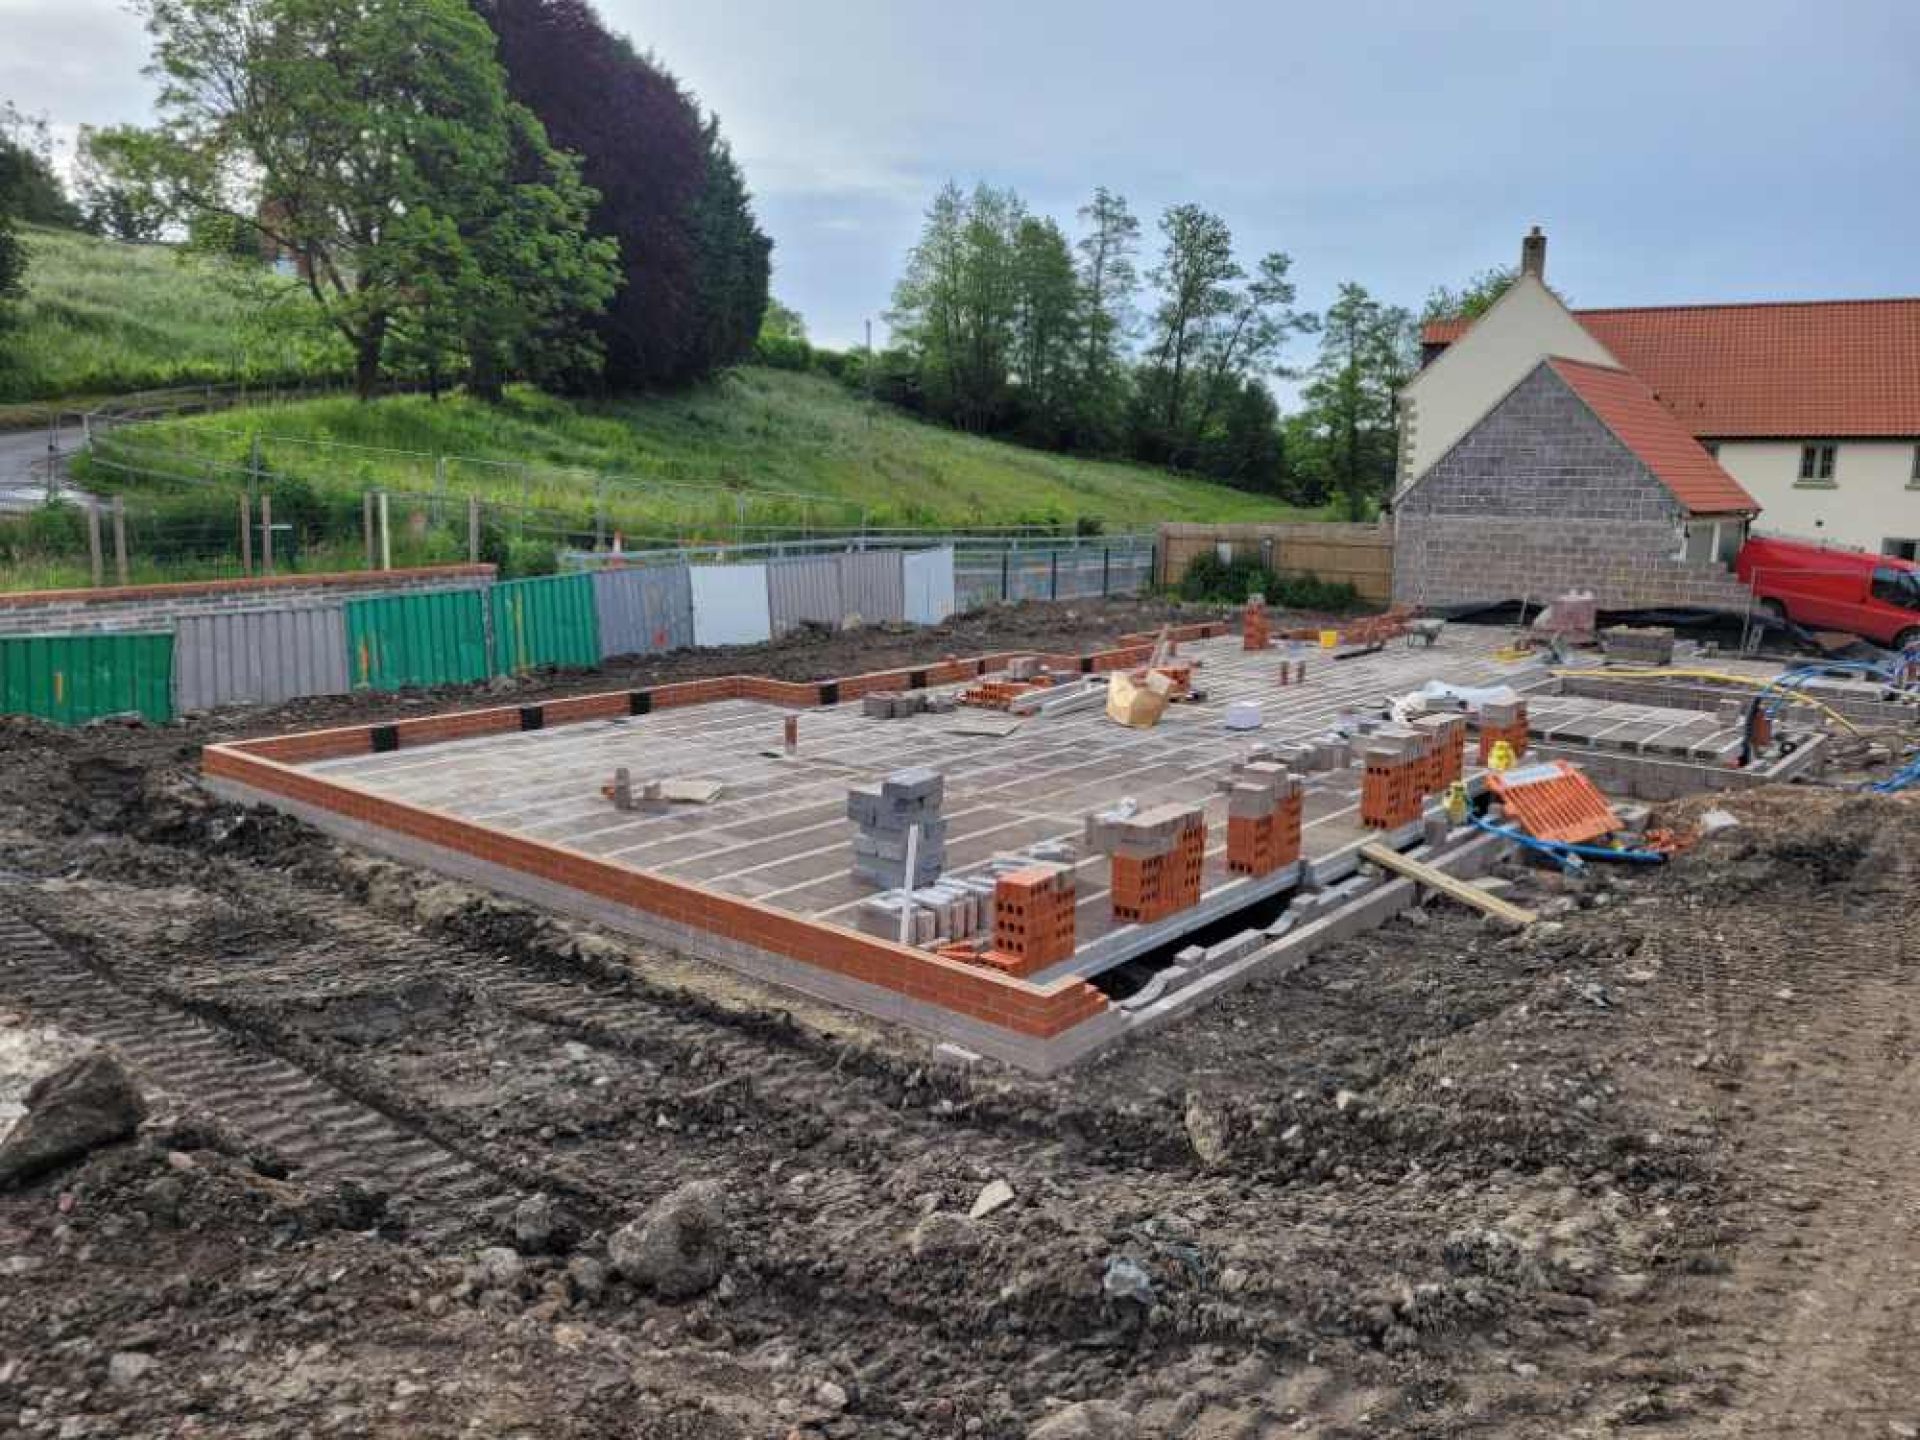 Foundations in place for 5 townhouse in dorset. Brick and concrete set.